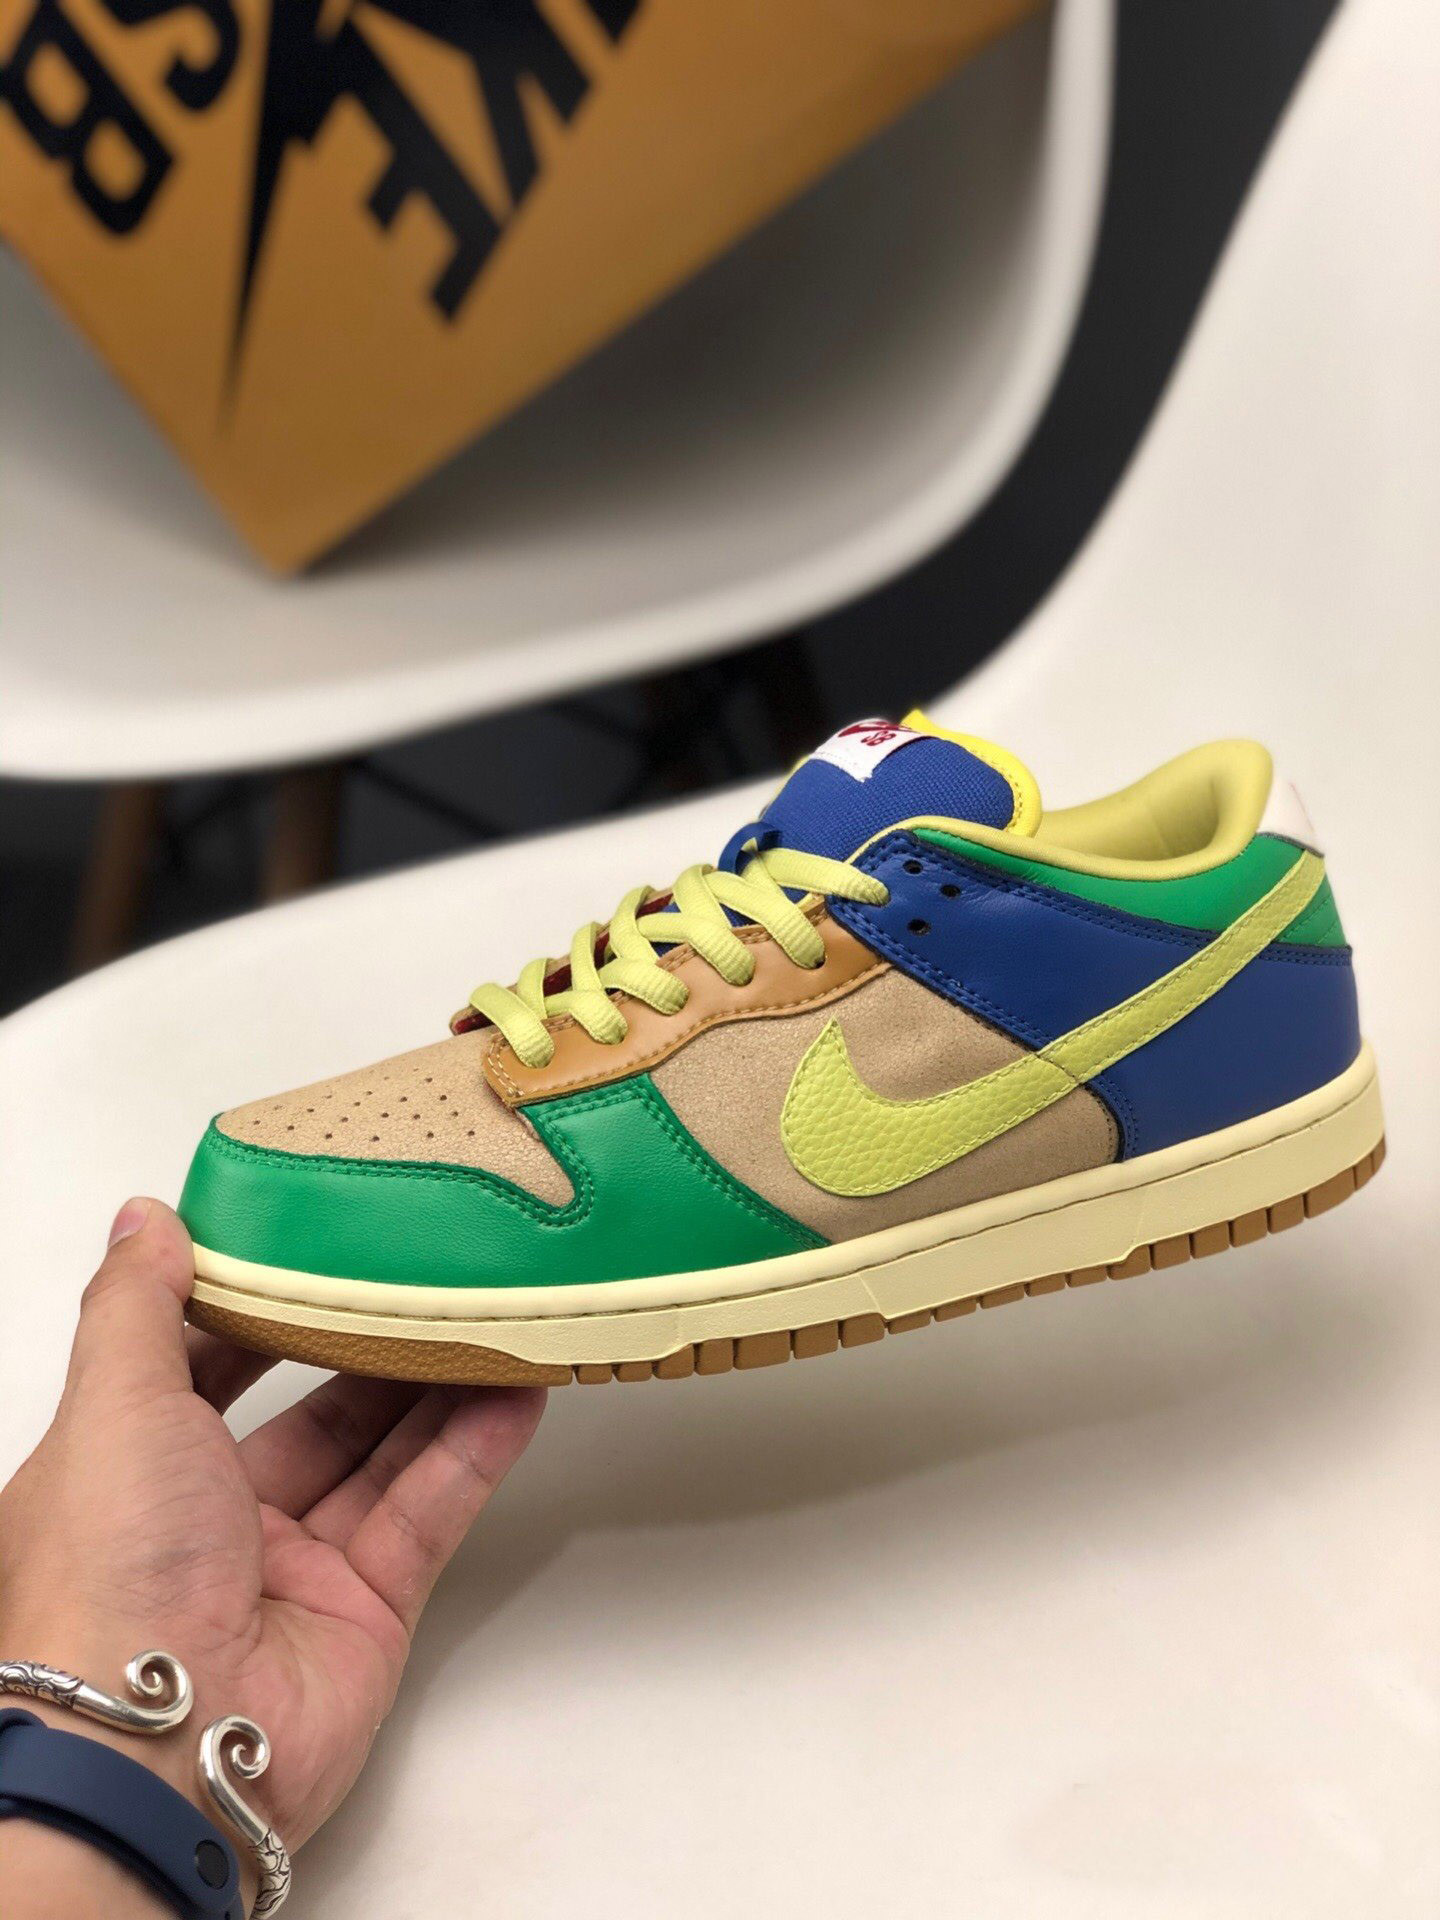 Brooklyn Projects x Nike SB Dunk Low Premium Halo Zitron For Sale